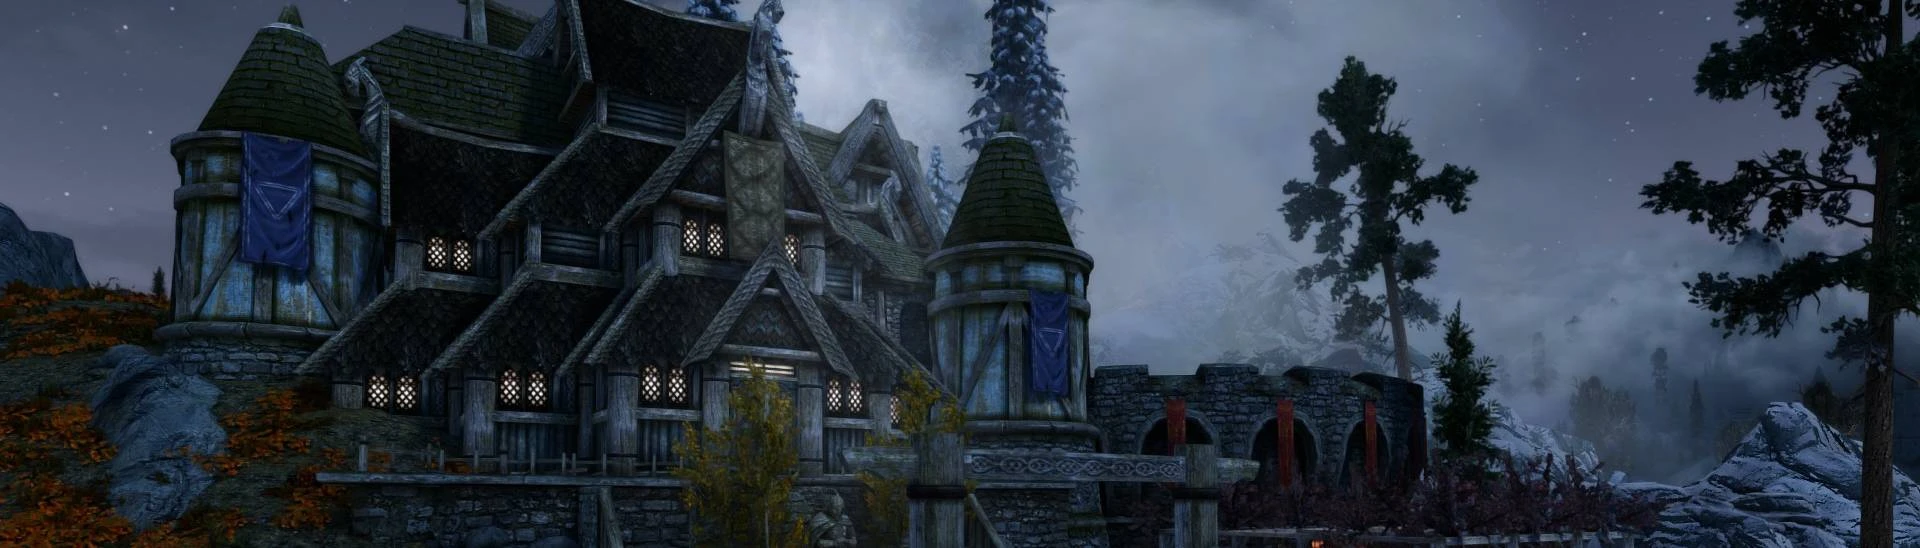 Nexus Mods on X: Home Sweet Valley for #SkyrimSpecialEdition is a not-so  lore friendly player home near Solitude, with no load doors it's definitely  worth a look.  #NexusMods #SkyrimMods #SkyrimSE  #SkyrimSEMods #